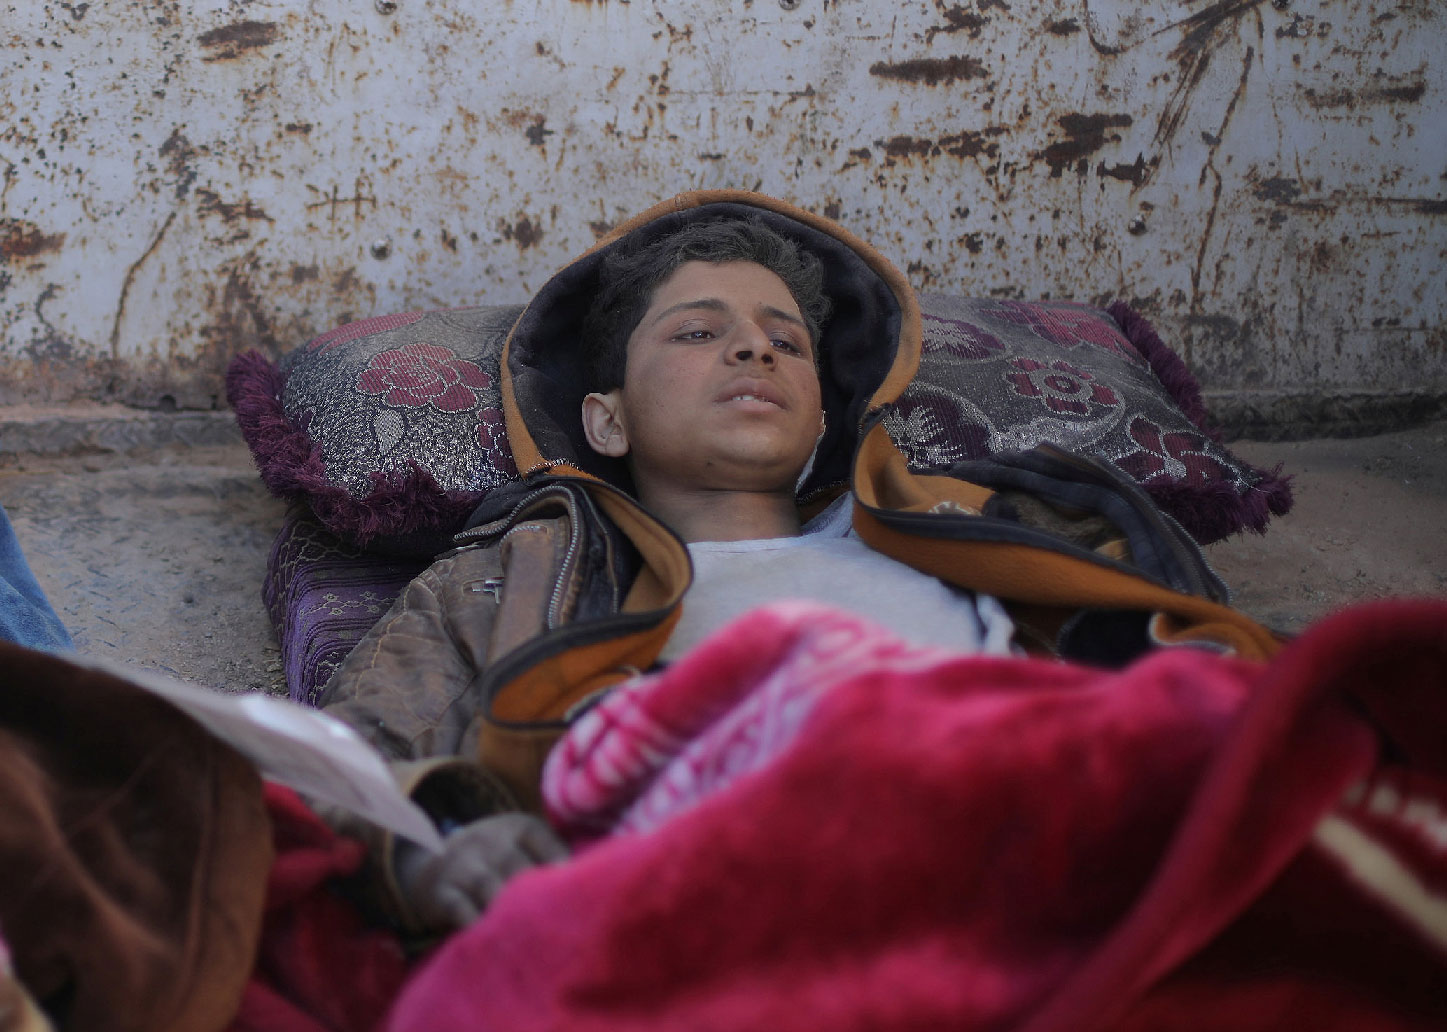 Hareth Najem, an Iraqi orphan lies under a blanket in a truck, near the village of Baghouz, Deir Al Zor province, Syria March 1, 2019. Picture taken March 1, 2019.